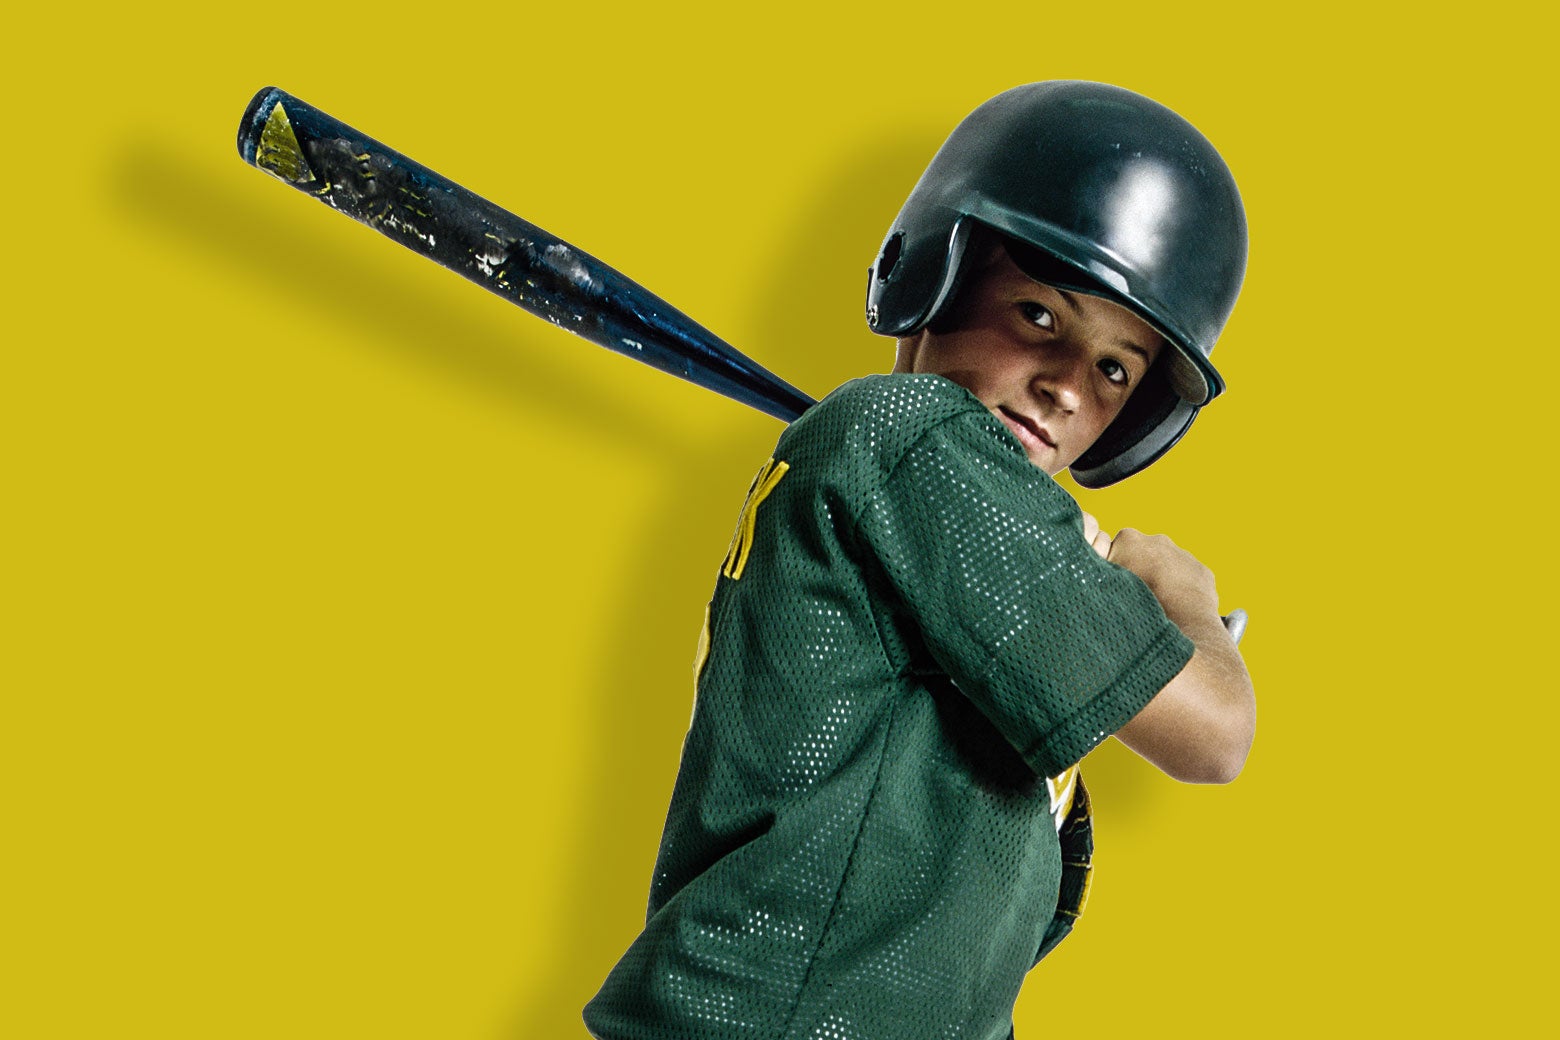 A boy in a green baseball jersey stands with bat ready to swing against a bright yellow background. 